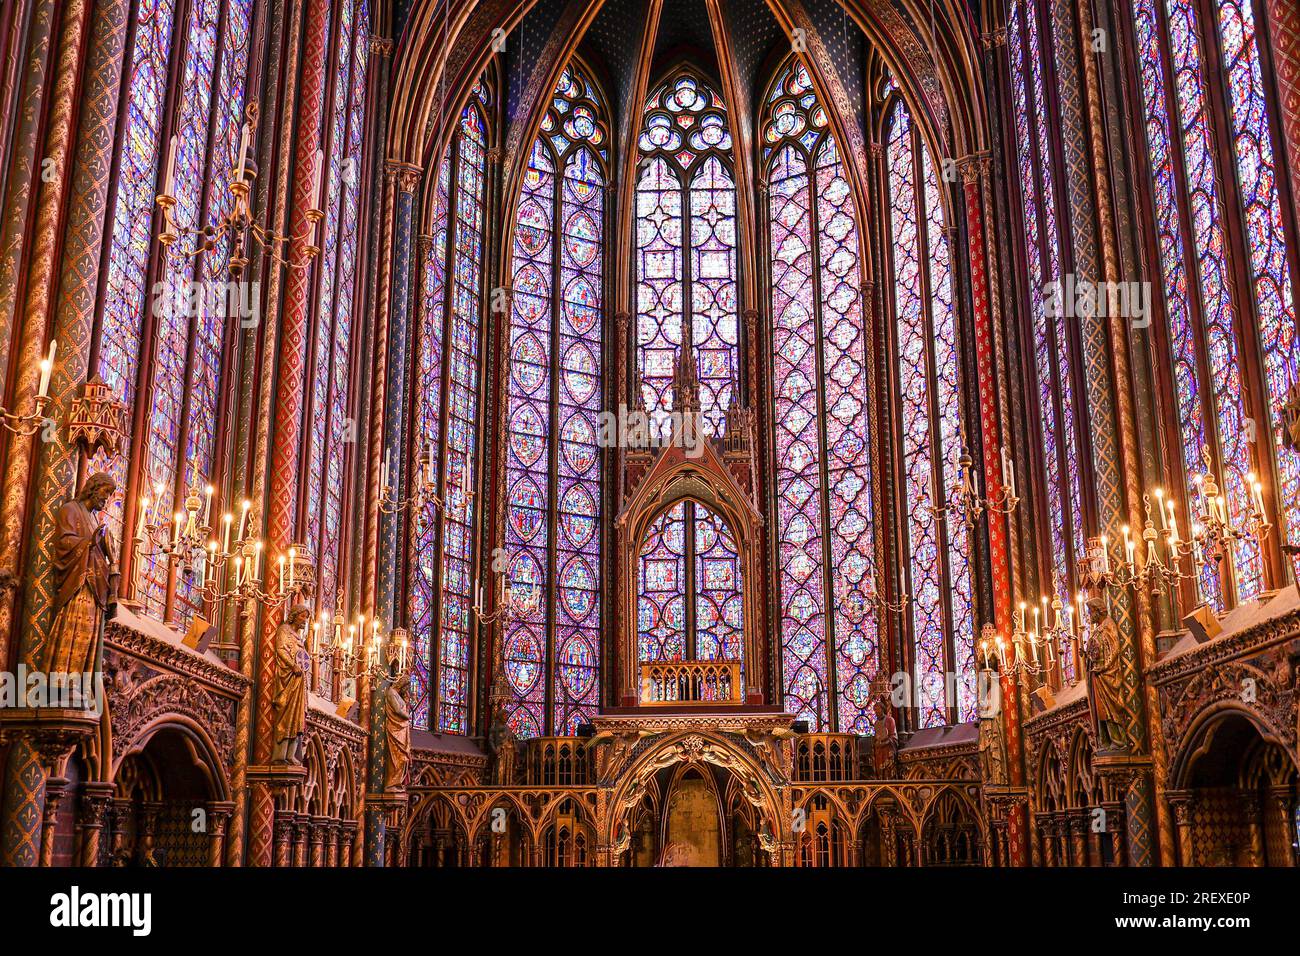 PARIS, FRANCE - OCTOBER 26, 2022: Interior View of Sainte-Chapelle, a Gothic Style Royal Chapel in the Centre of Paris. Stock Photo